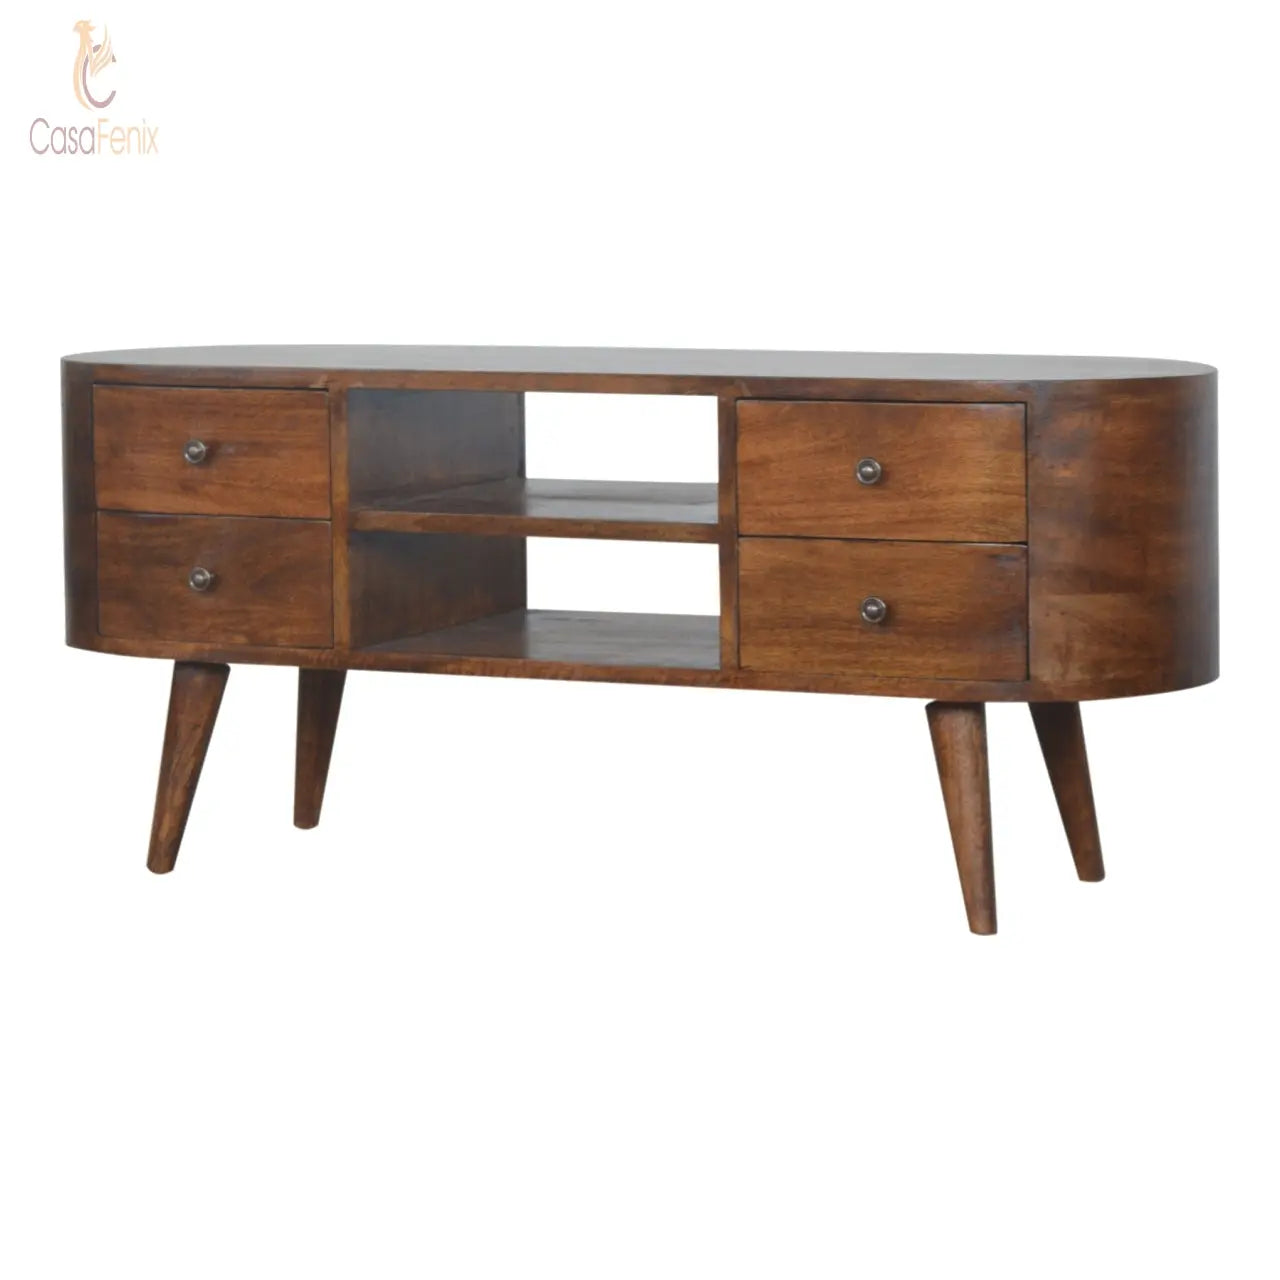 Chestnut Rounded Entertainment Unit 4 Drawer TV Stand Entertainment Centers & TV Stands CasaFenix